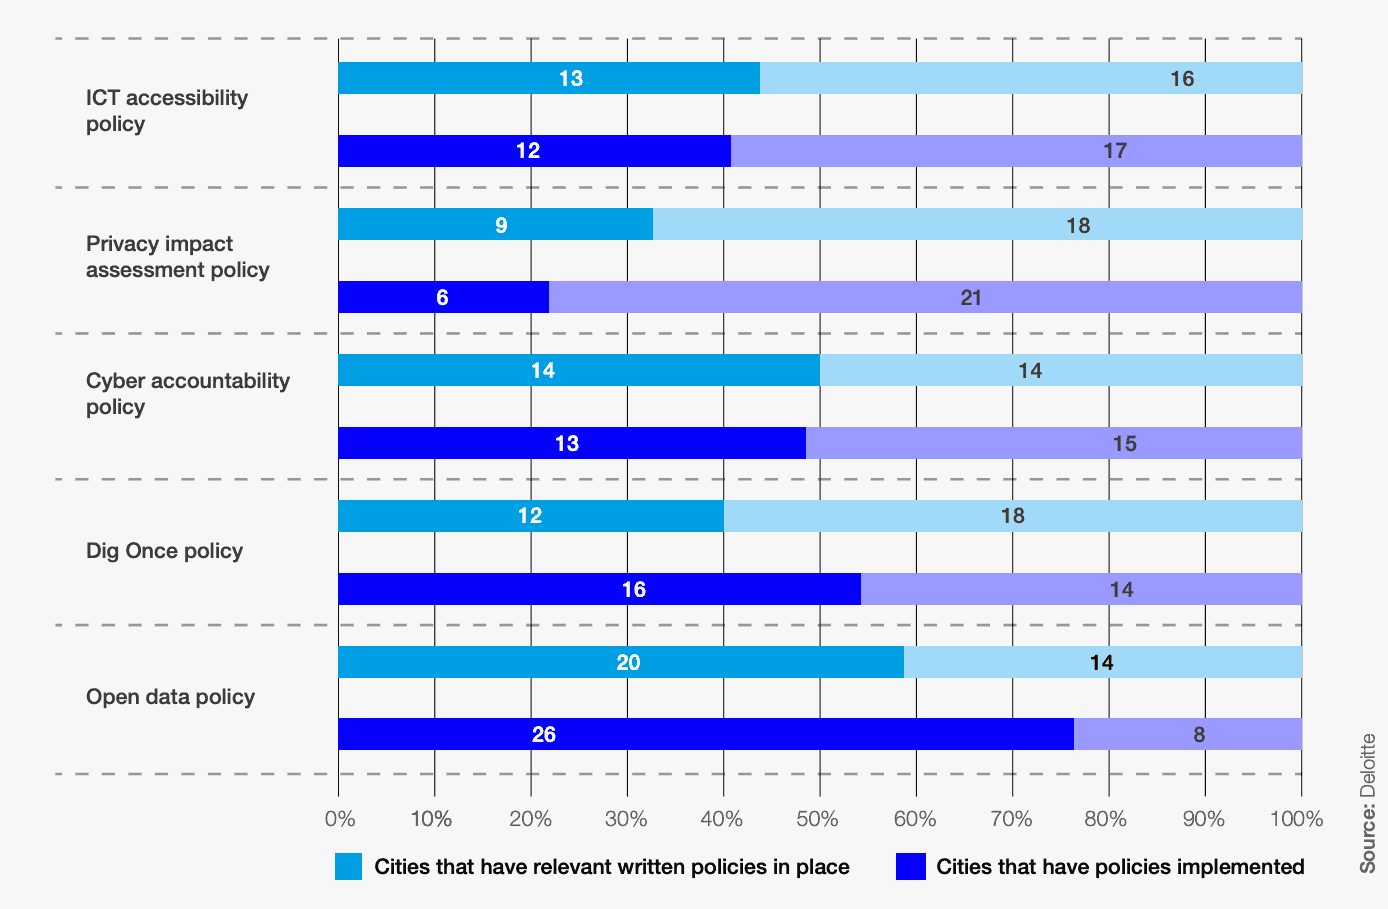 A chart showing what share of 36 surveyed cities have policies in each of 5 areas.